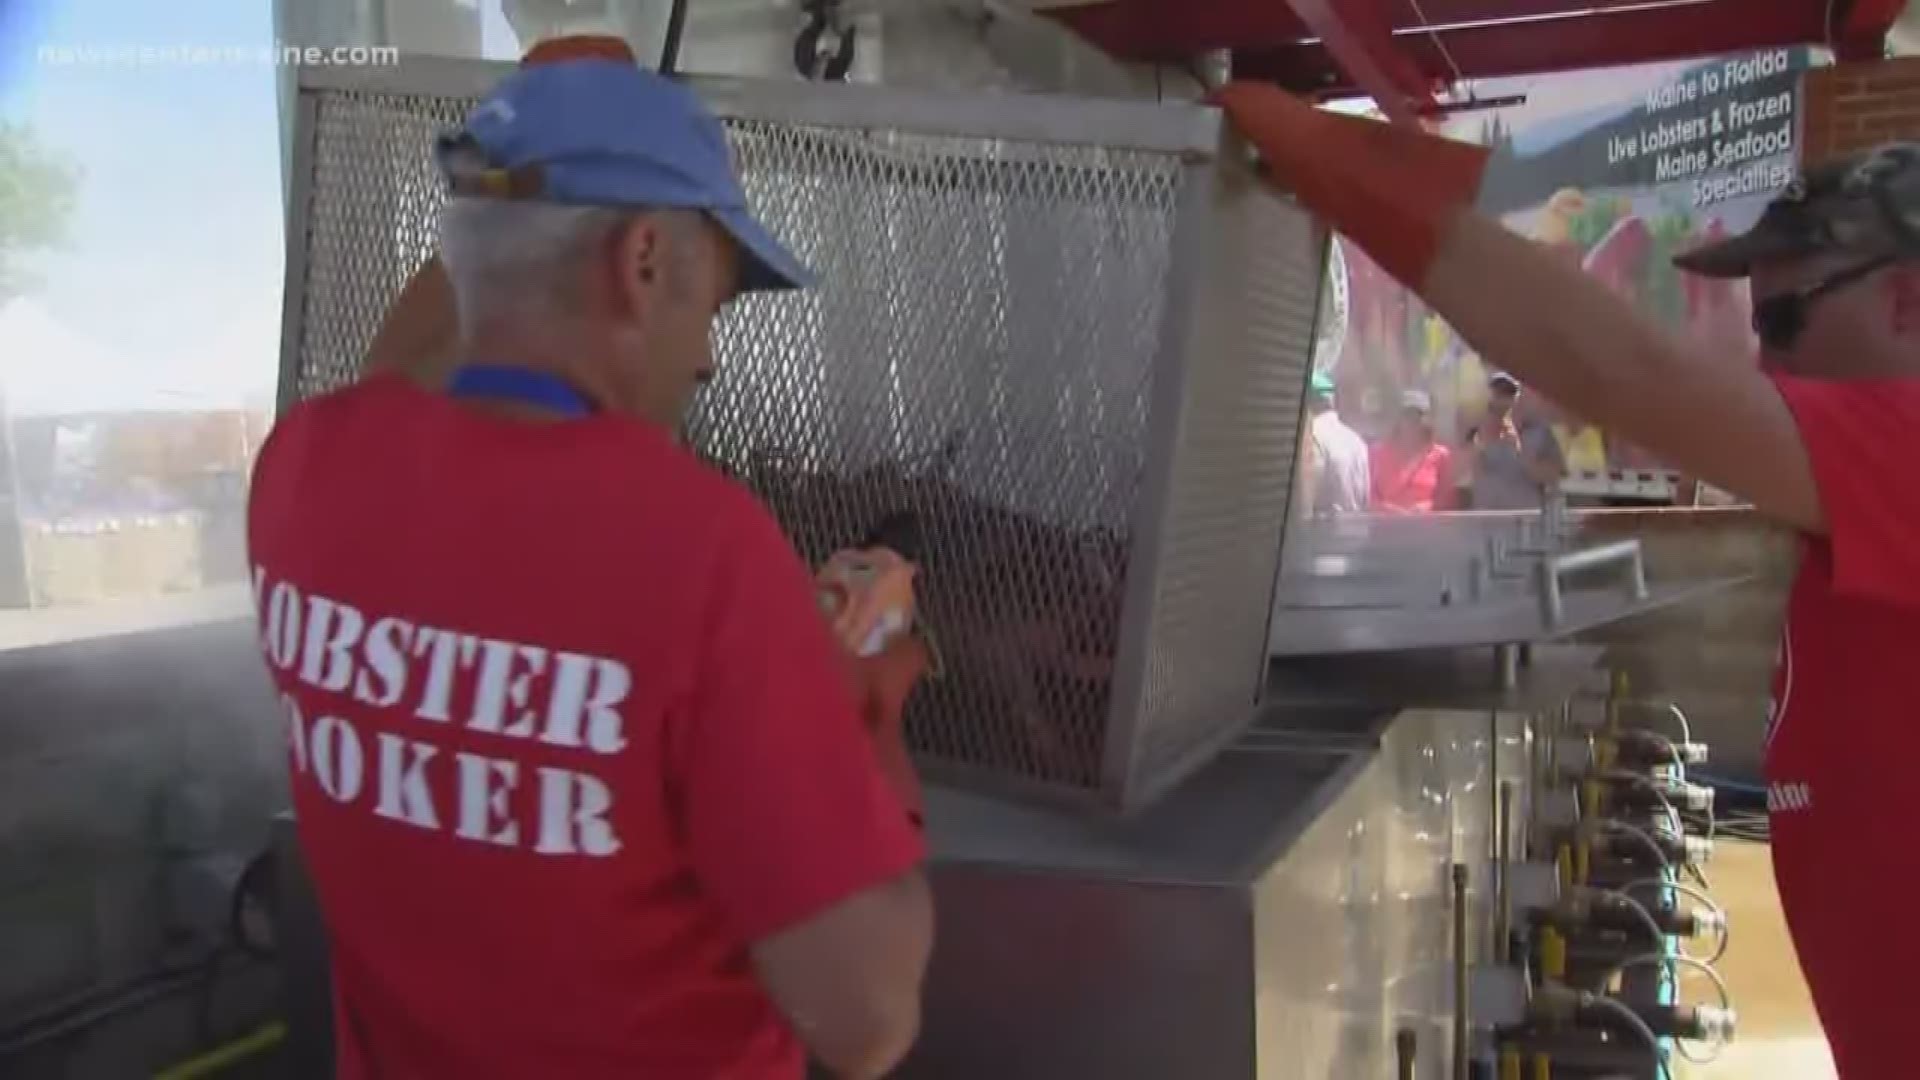 The 72nd annual Maine Lobster Festival kicks off Wednesday.